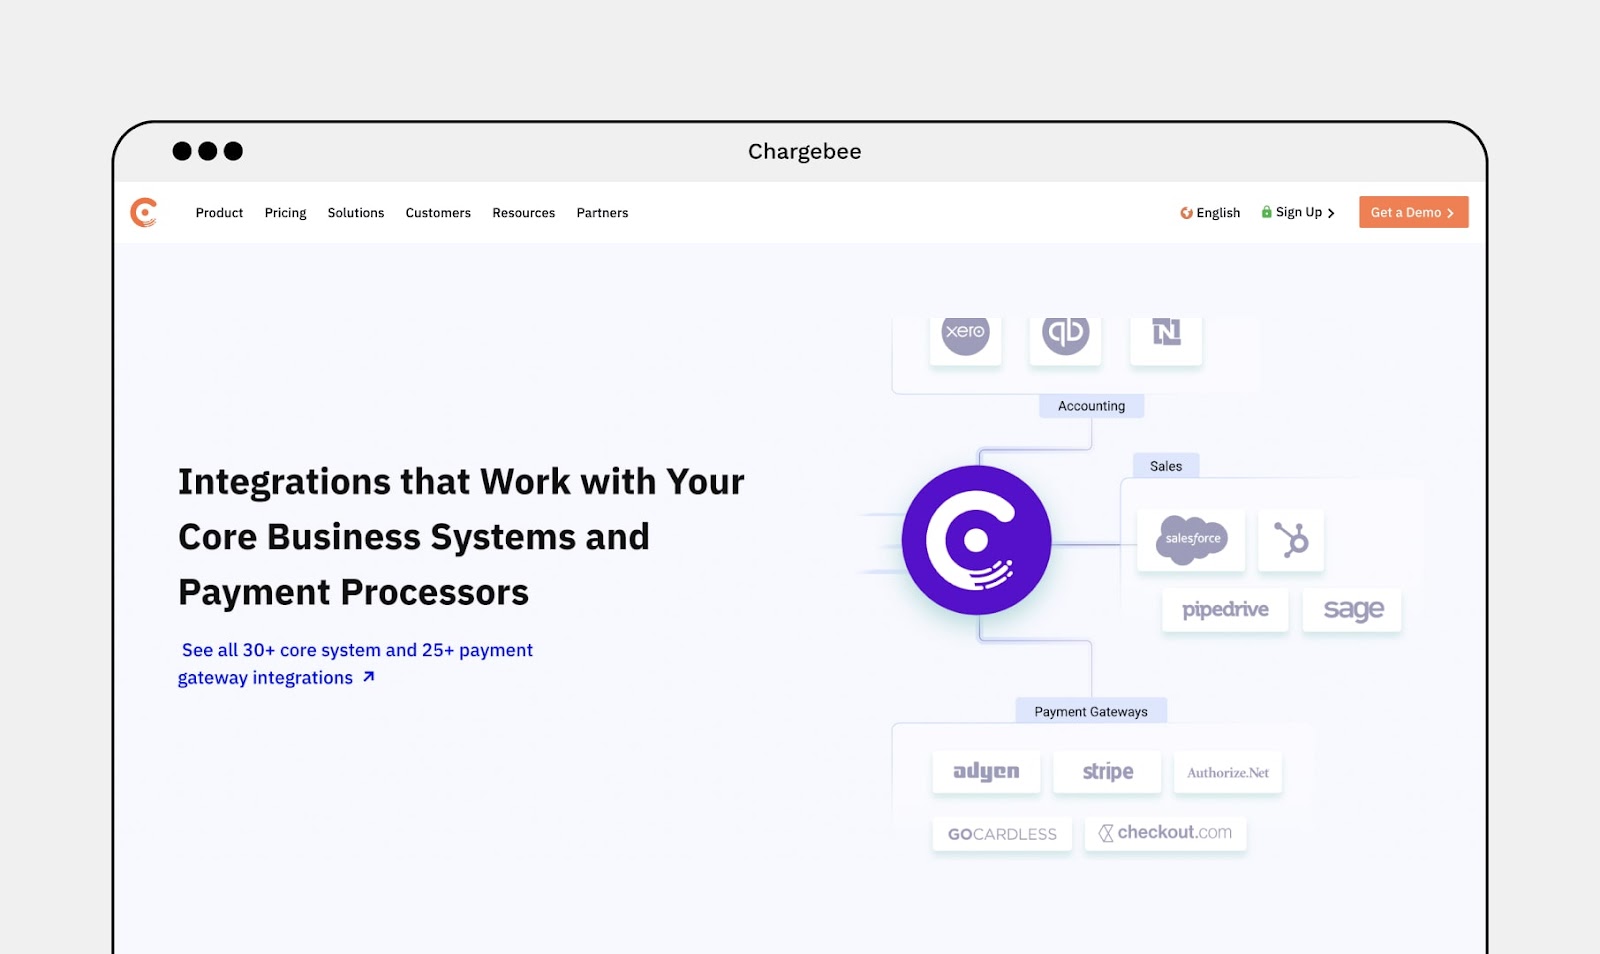 Screenshot of Chargebee's website page with Chargebee’s integration with systems and payment processors.